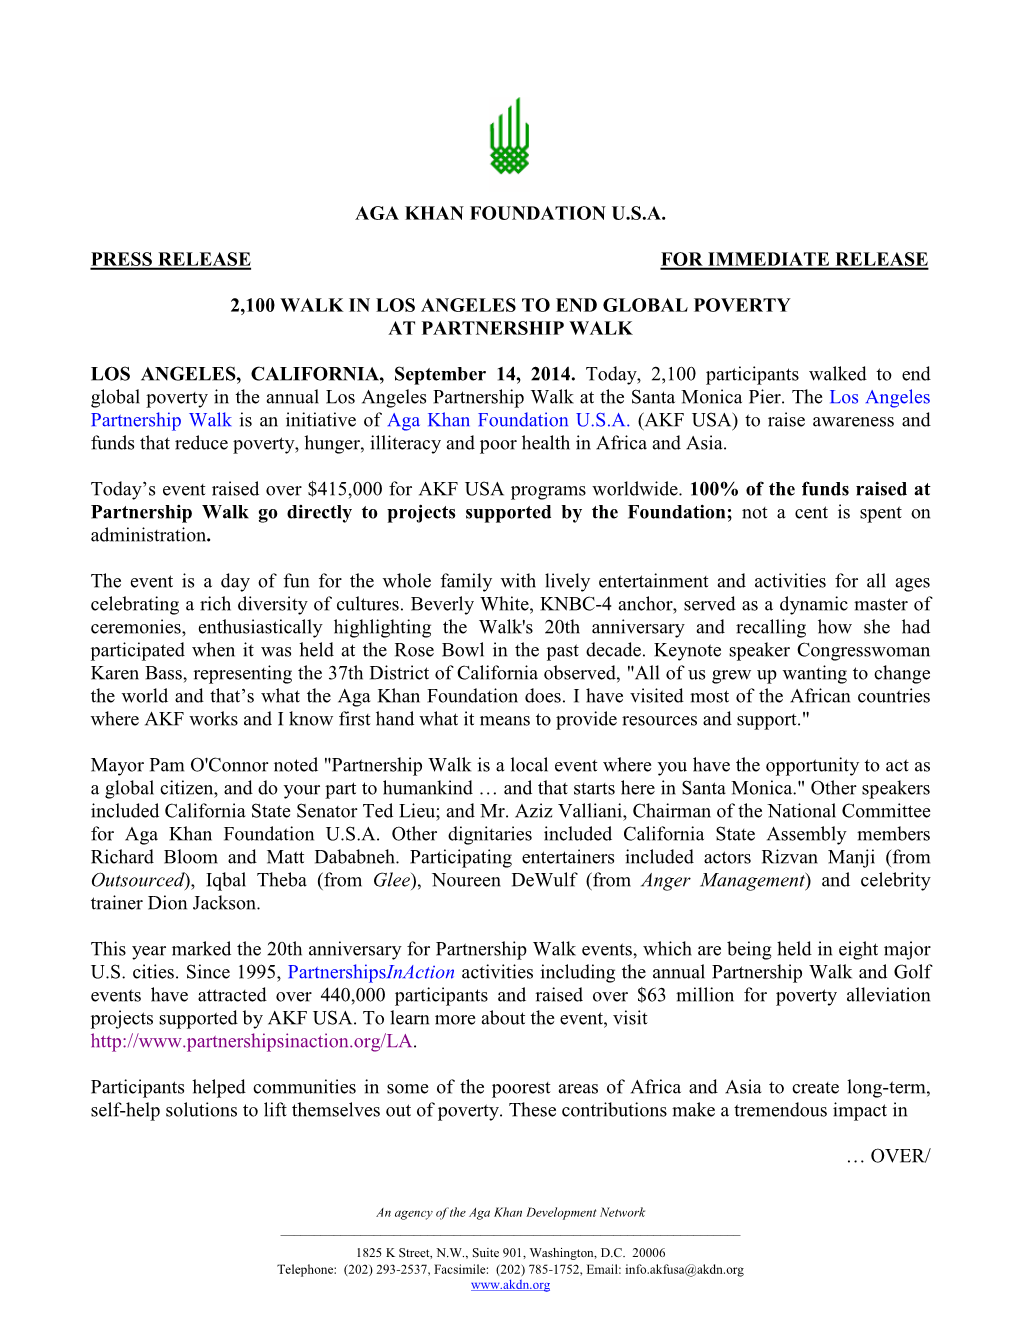 Aga Khan Foundation U.S.A. Press Release for Immediate Release 2,100 Walk in Los Angeles to End Global Poverty at Partnership